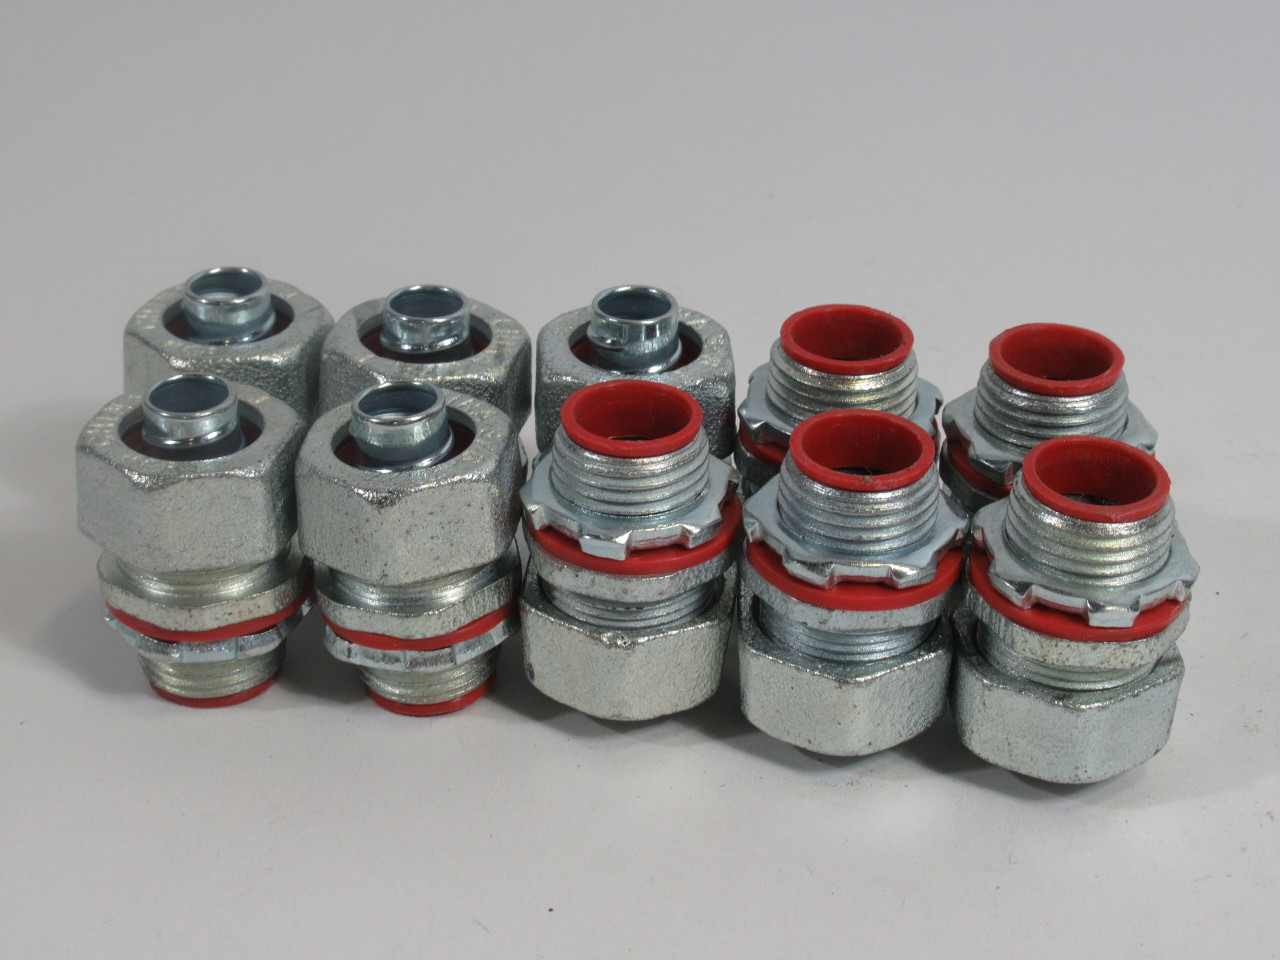 Generic 3/8 Liquid Tight Couplings 3/8 NPT RED Lot of 10 USED